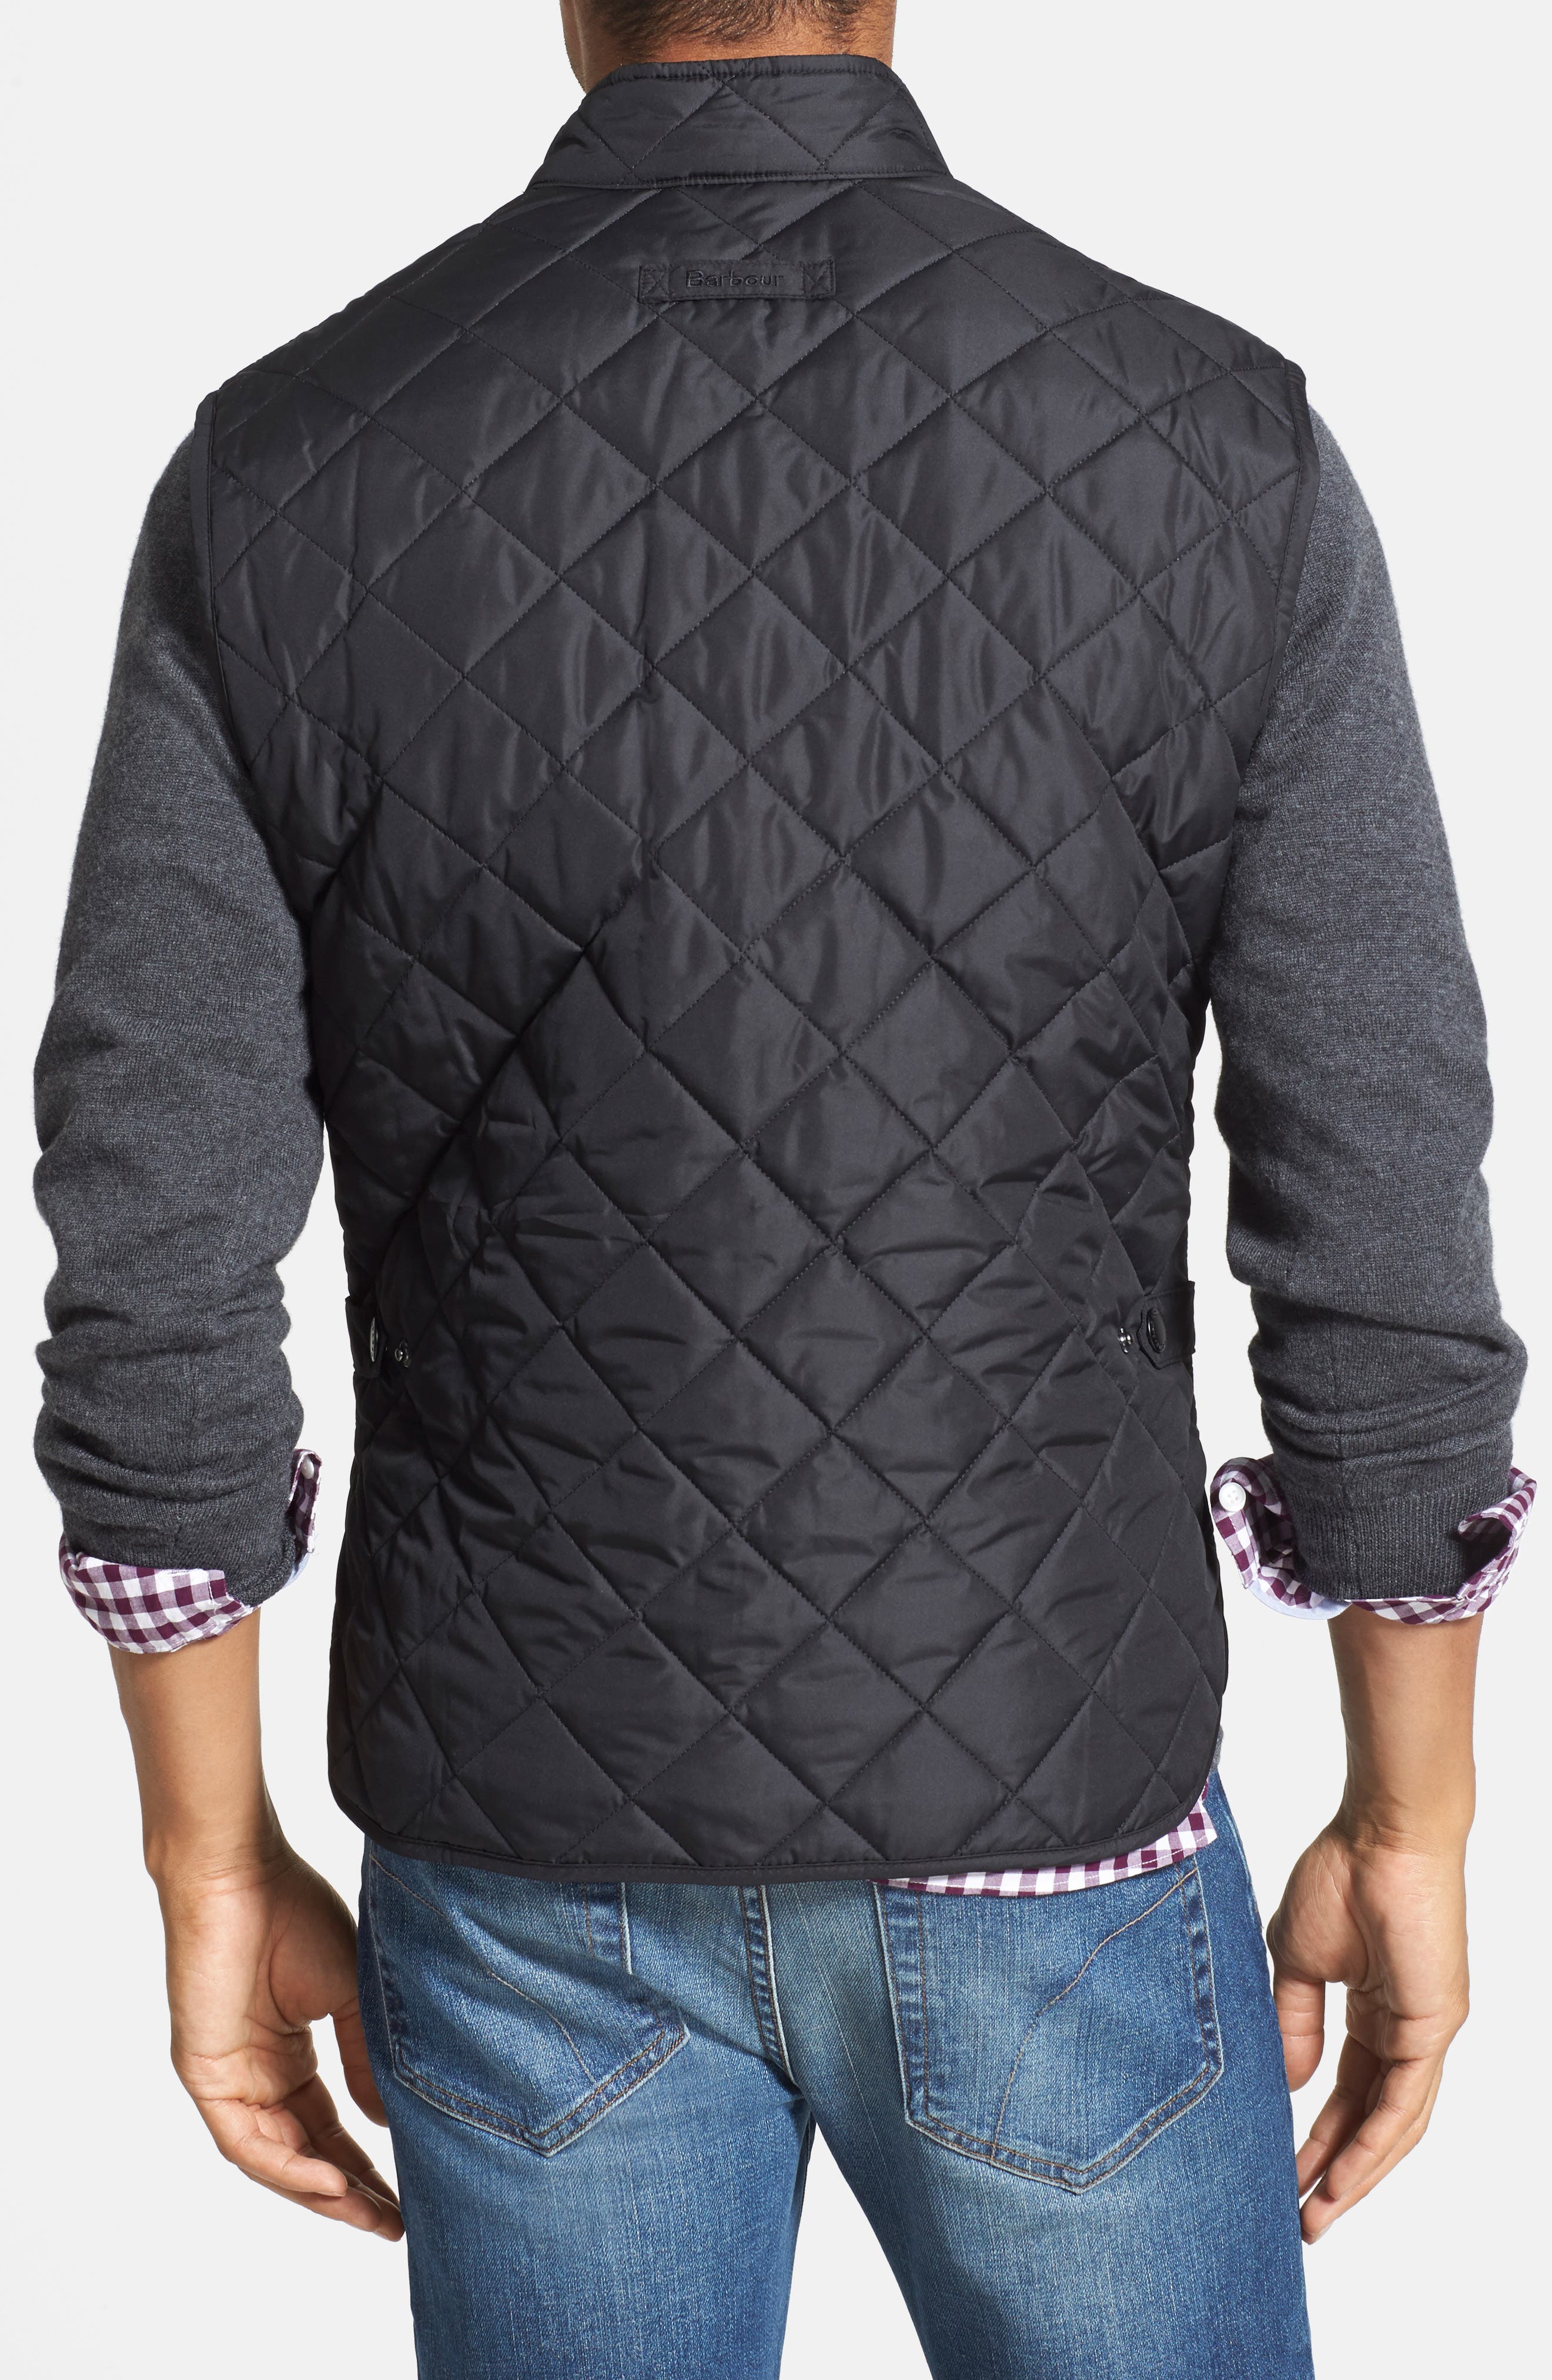 barbour lowerdale quilted gilet